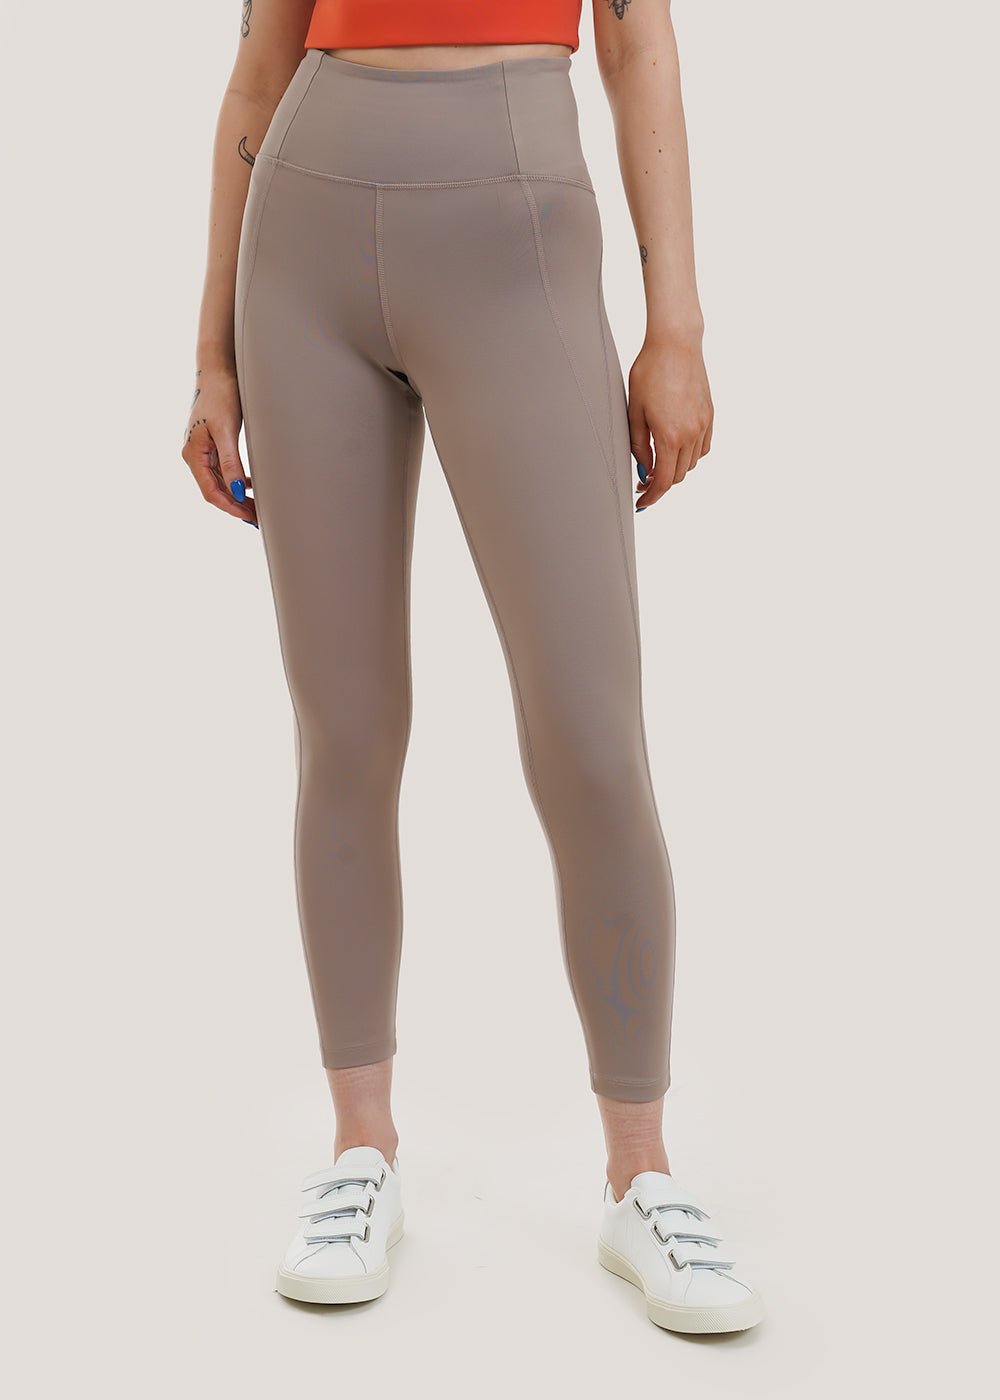 The Compressive High-Rise Legging by Girlfriend Collective - Antler - PLUS